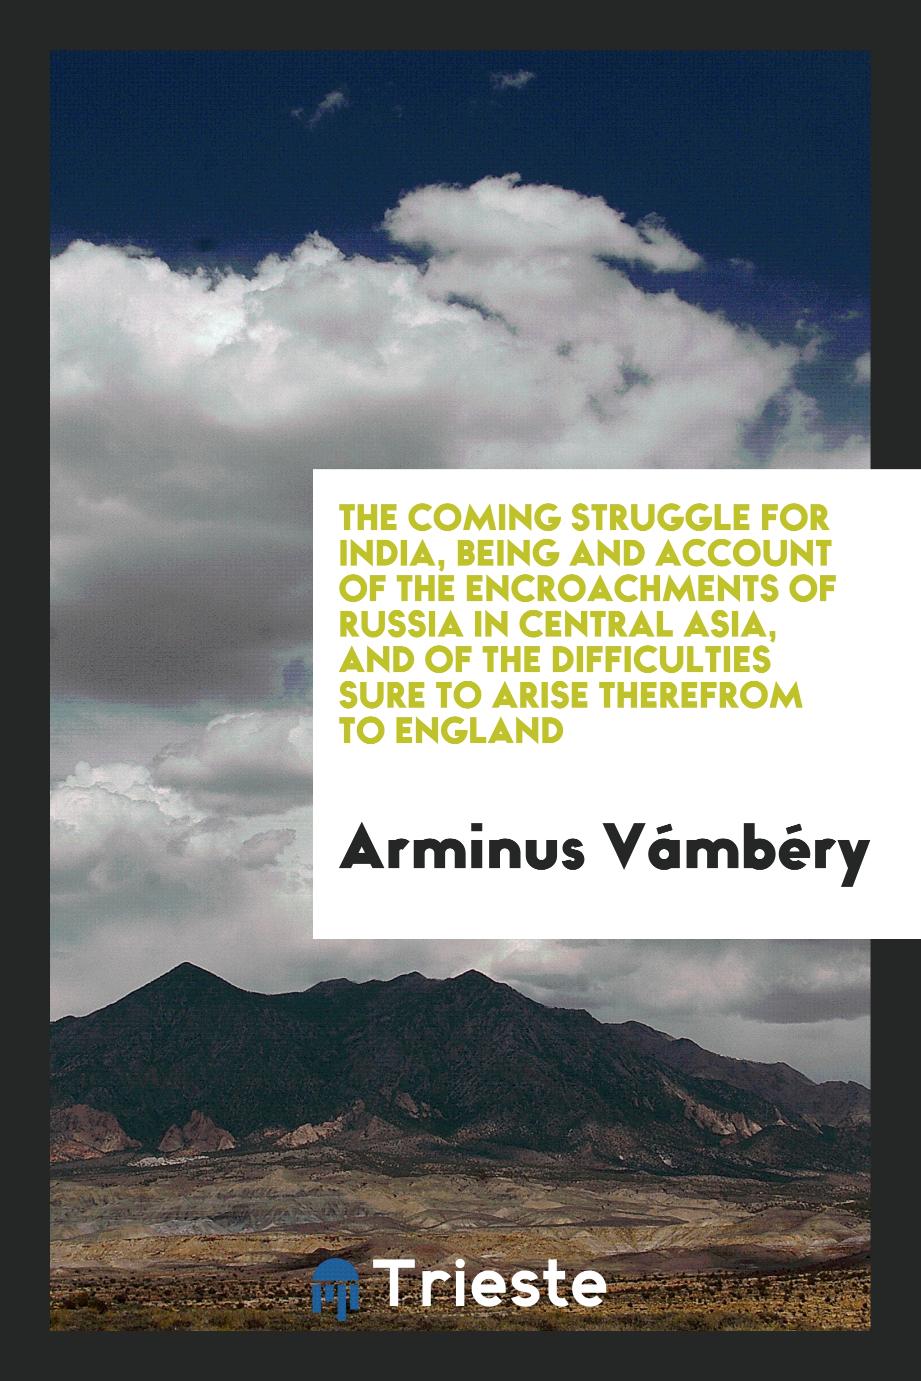 The coming struggle for India, being and account of the encroachments of Russia in Central Asia, and of the difficulties sure to arise therefrom to England